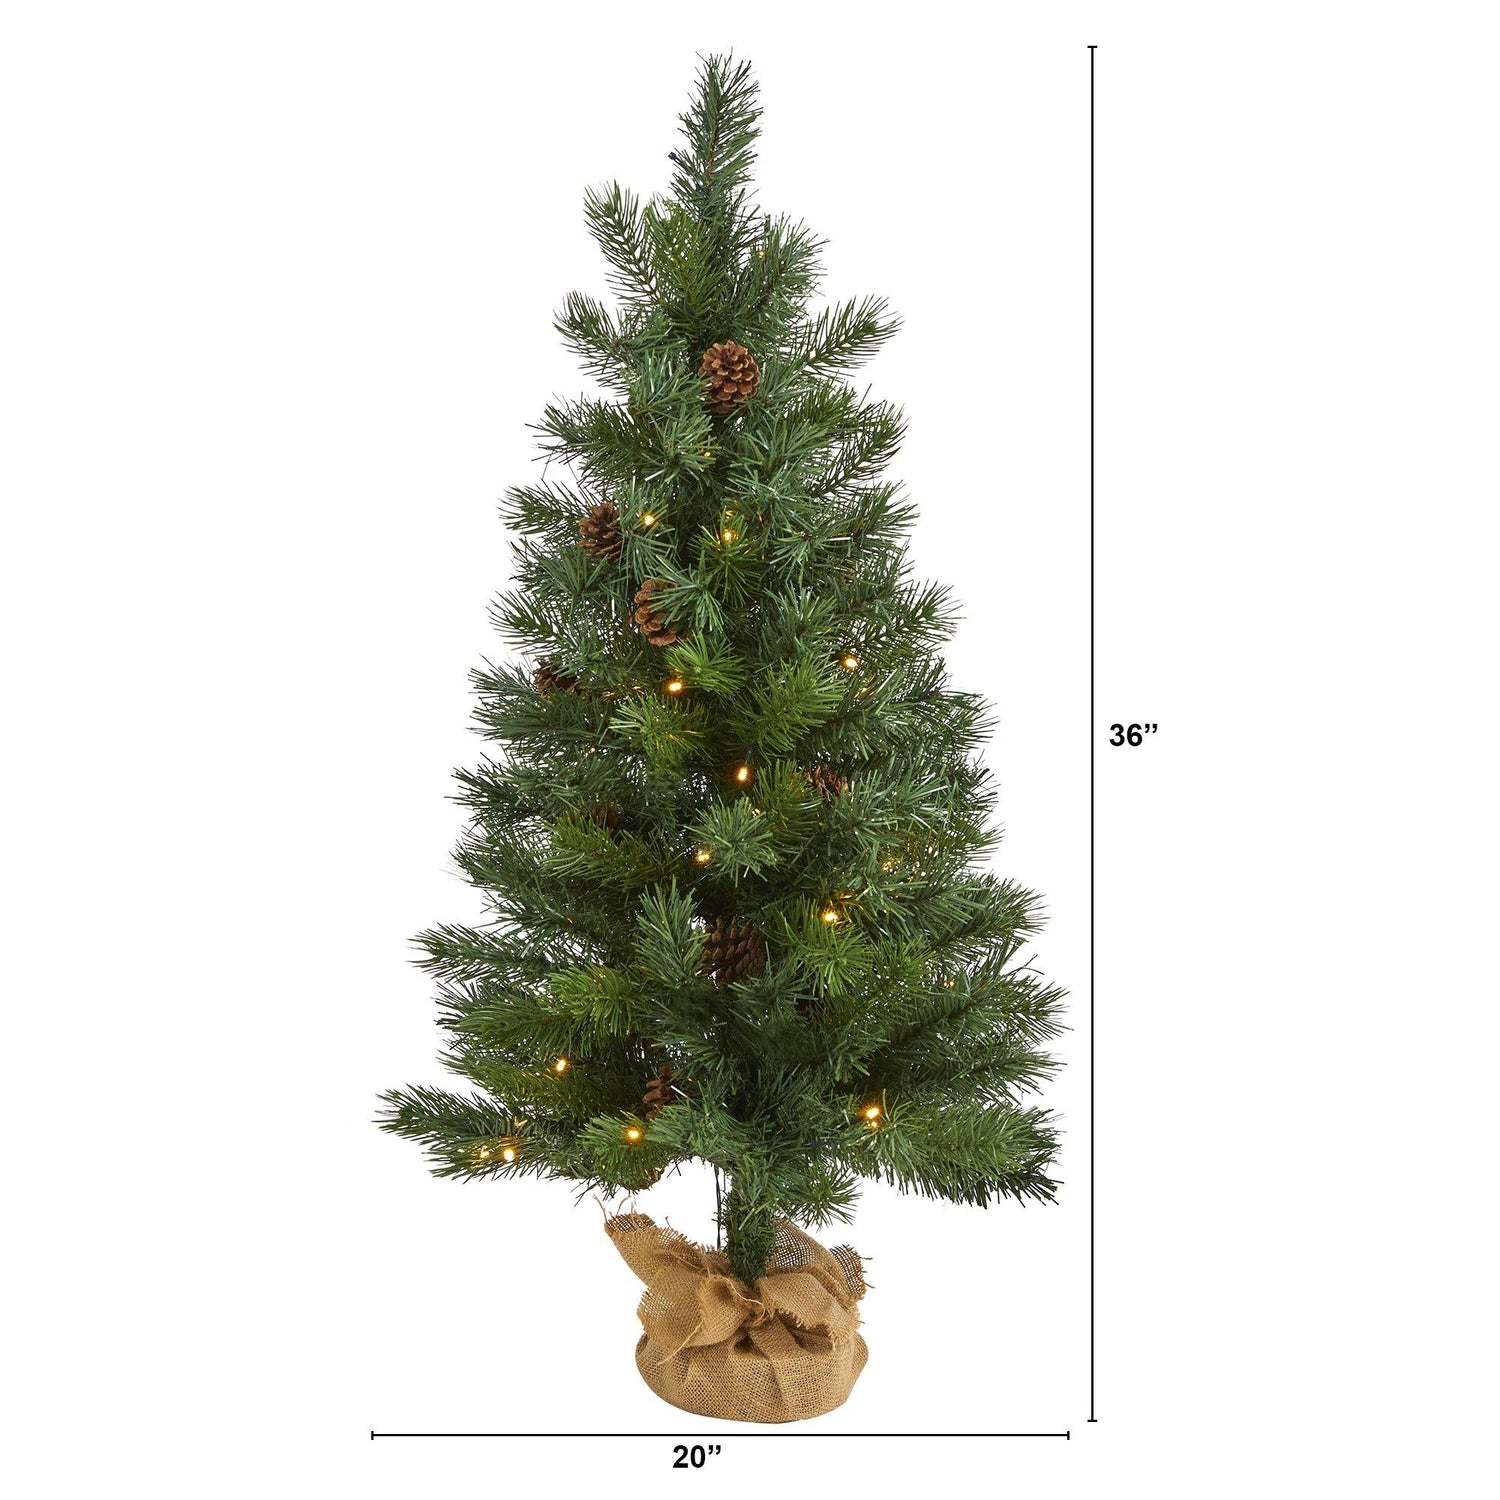 3’ Fraser Fir “Natural Look” Artificial Christmas Tree with 50 Clear LED Lights, Pinecones, a Burlap Base and 90 Bendable Branches